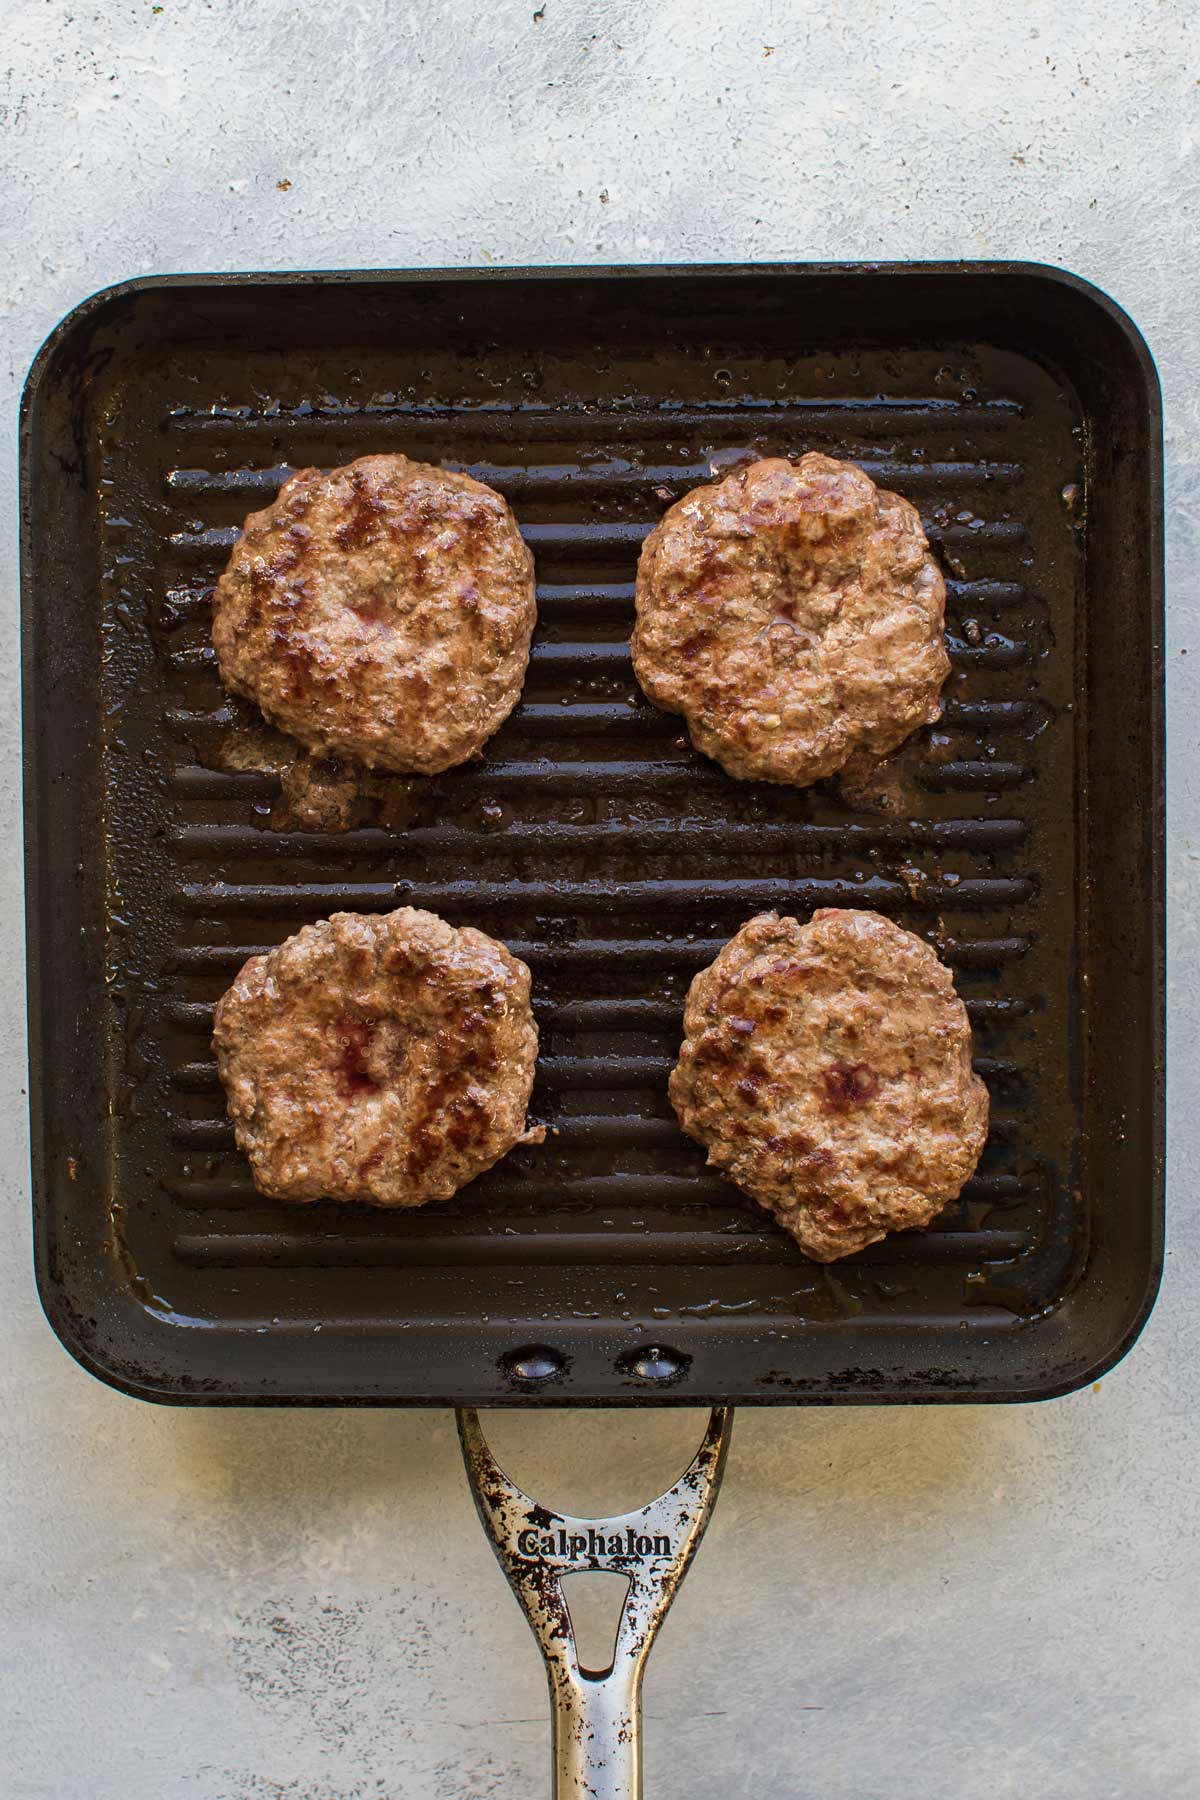 burgers on a grill pan.